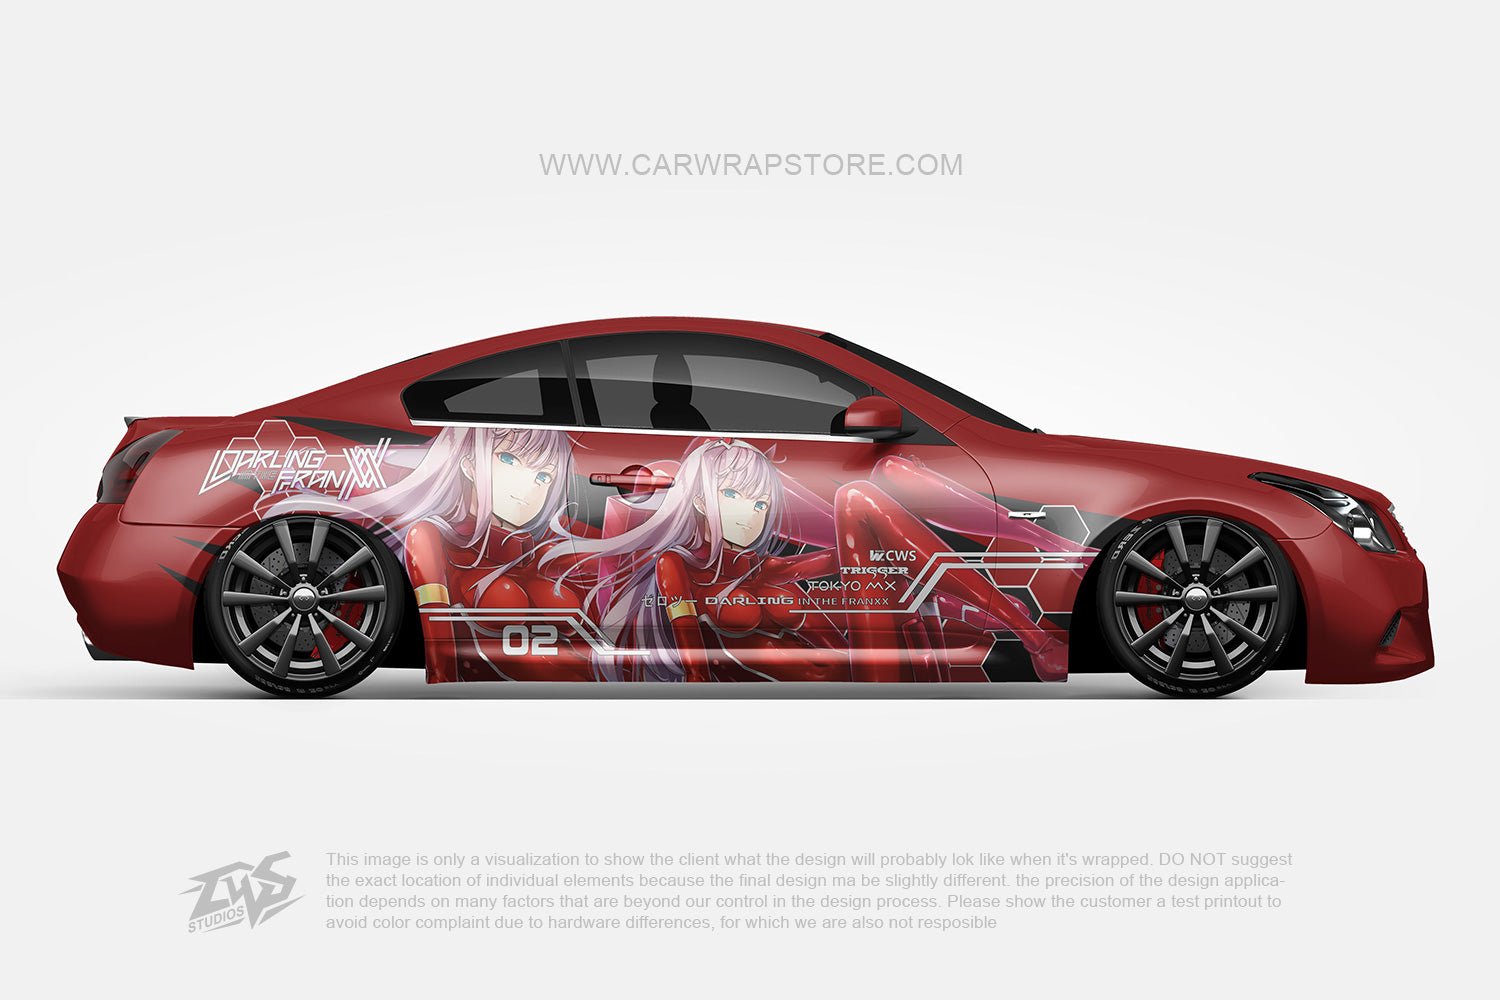 Zero Two DARLING in the FRANXX【002-02】 - Car Wrap Store